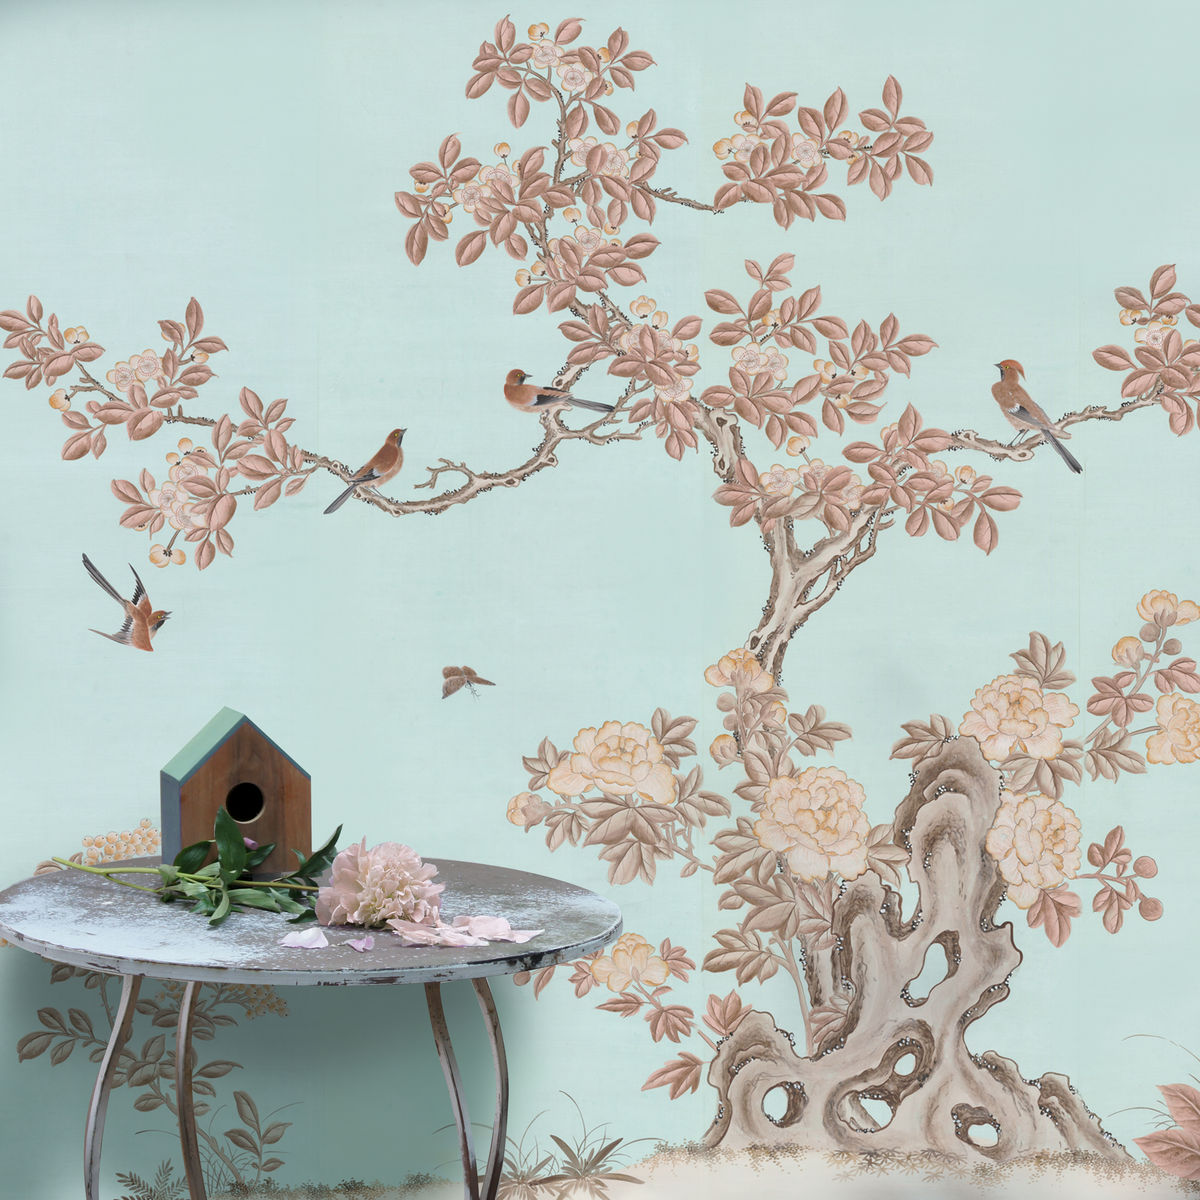 Coffee And Cream Chinoiserie Wallpaper   product images of 1200x1200